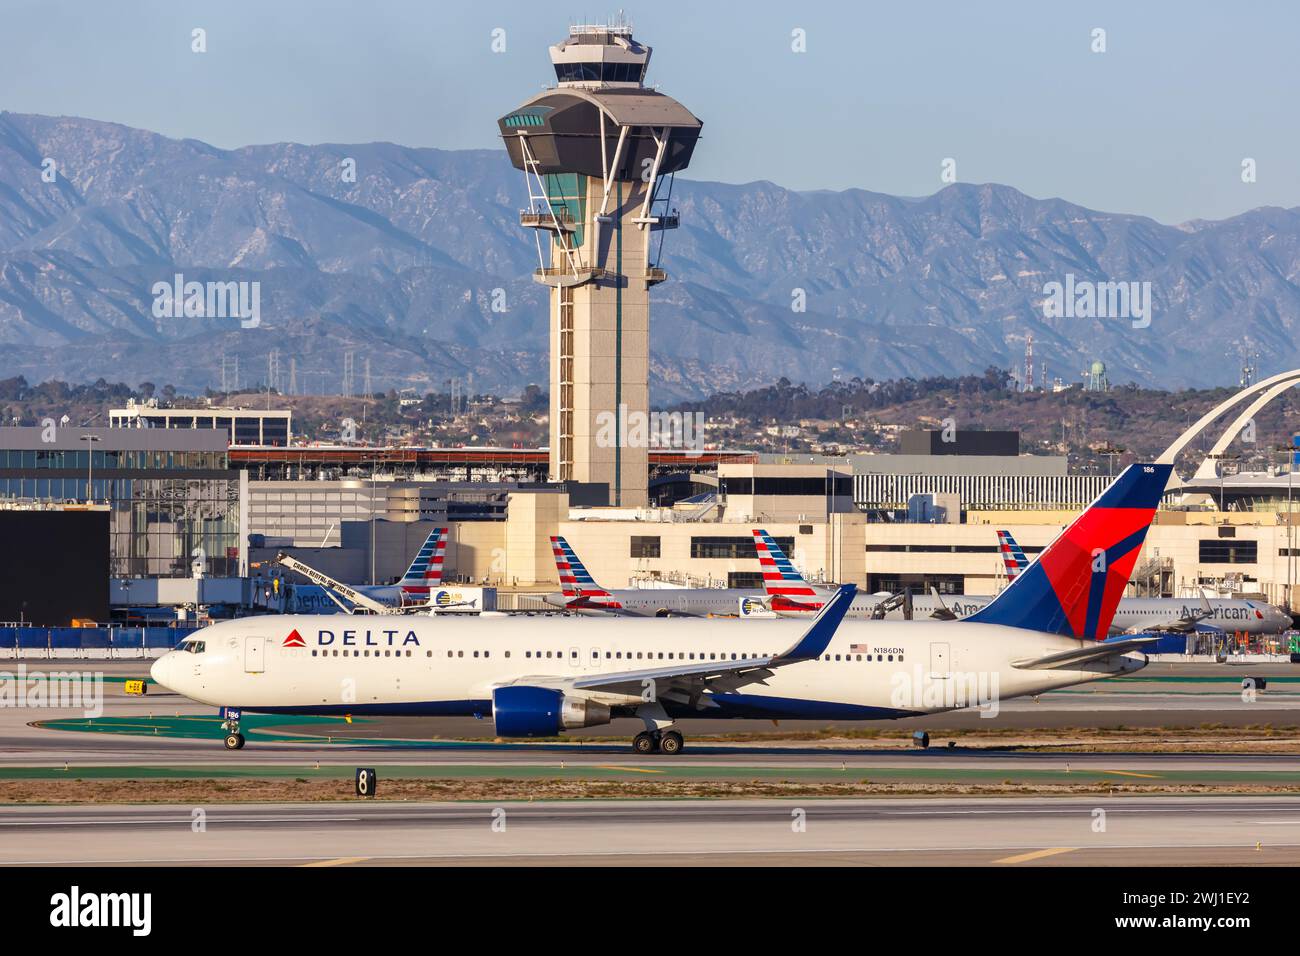 Delta Air Lines Boeing 767-300ER aircraft Los Angeles Airport in the USA Stock Photo